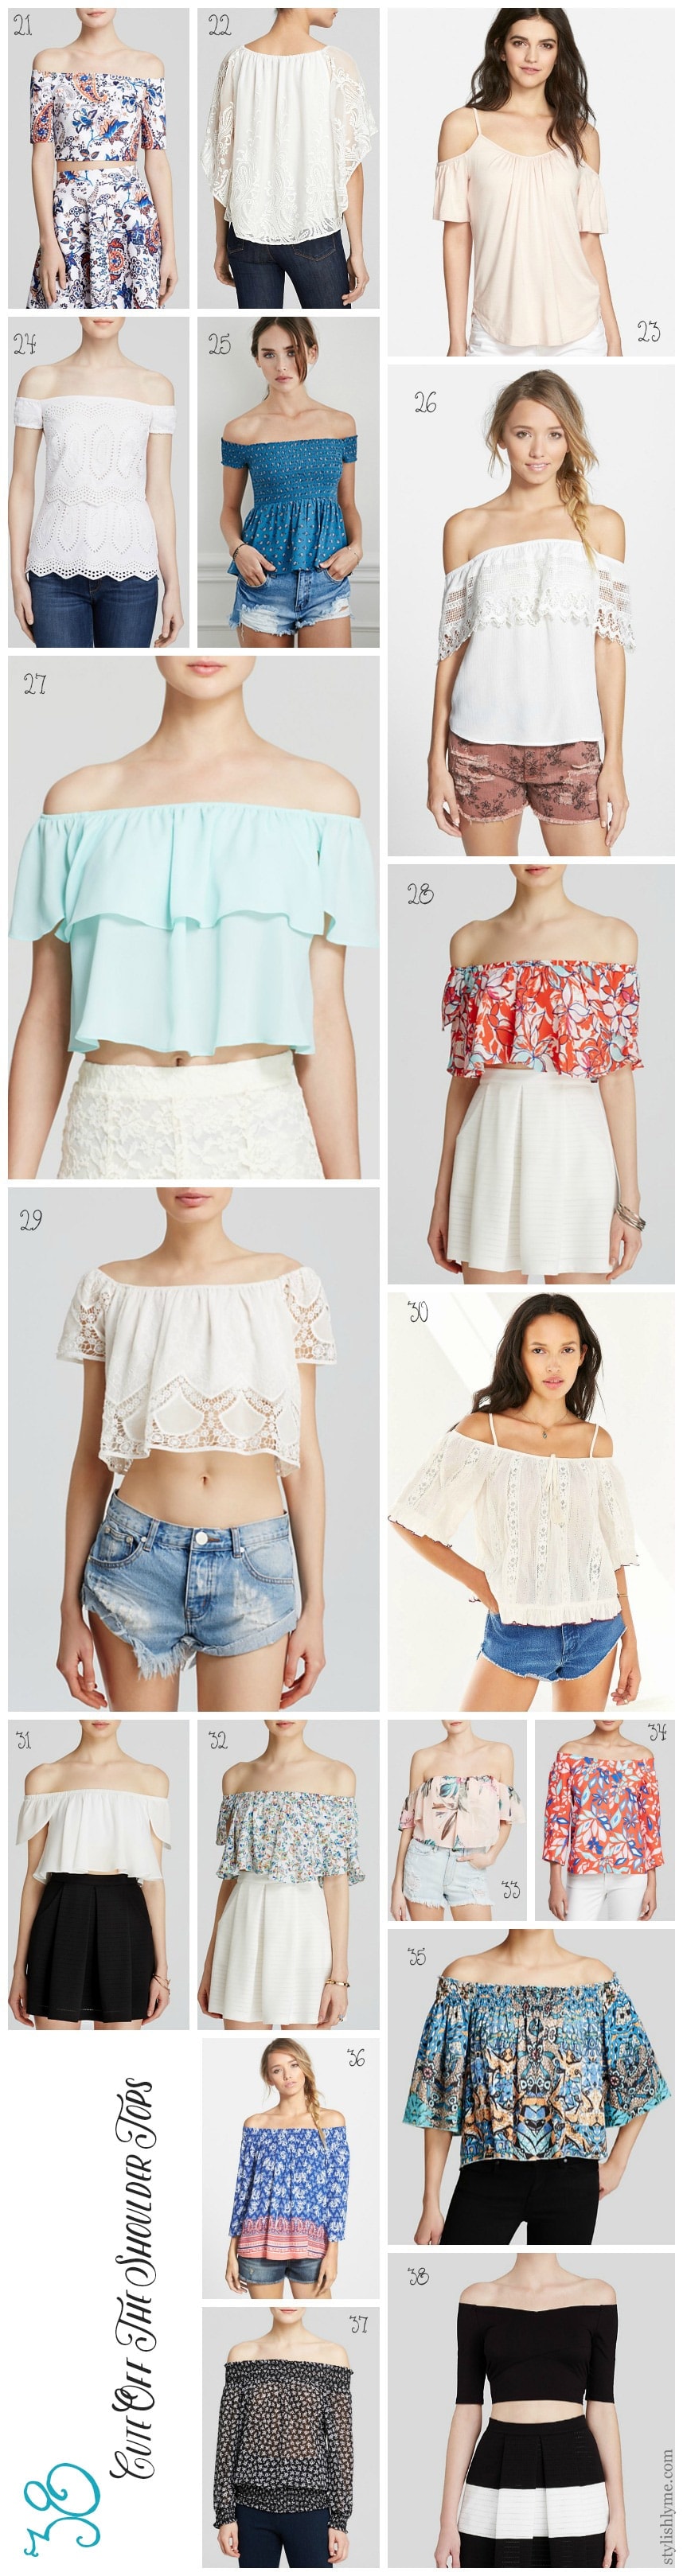 38 Cute off the Shoulder Tops for Spring and Summer - Click to view all 38 tops!